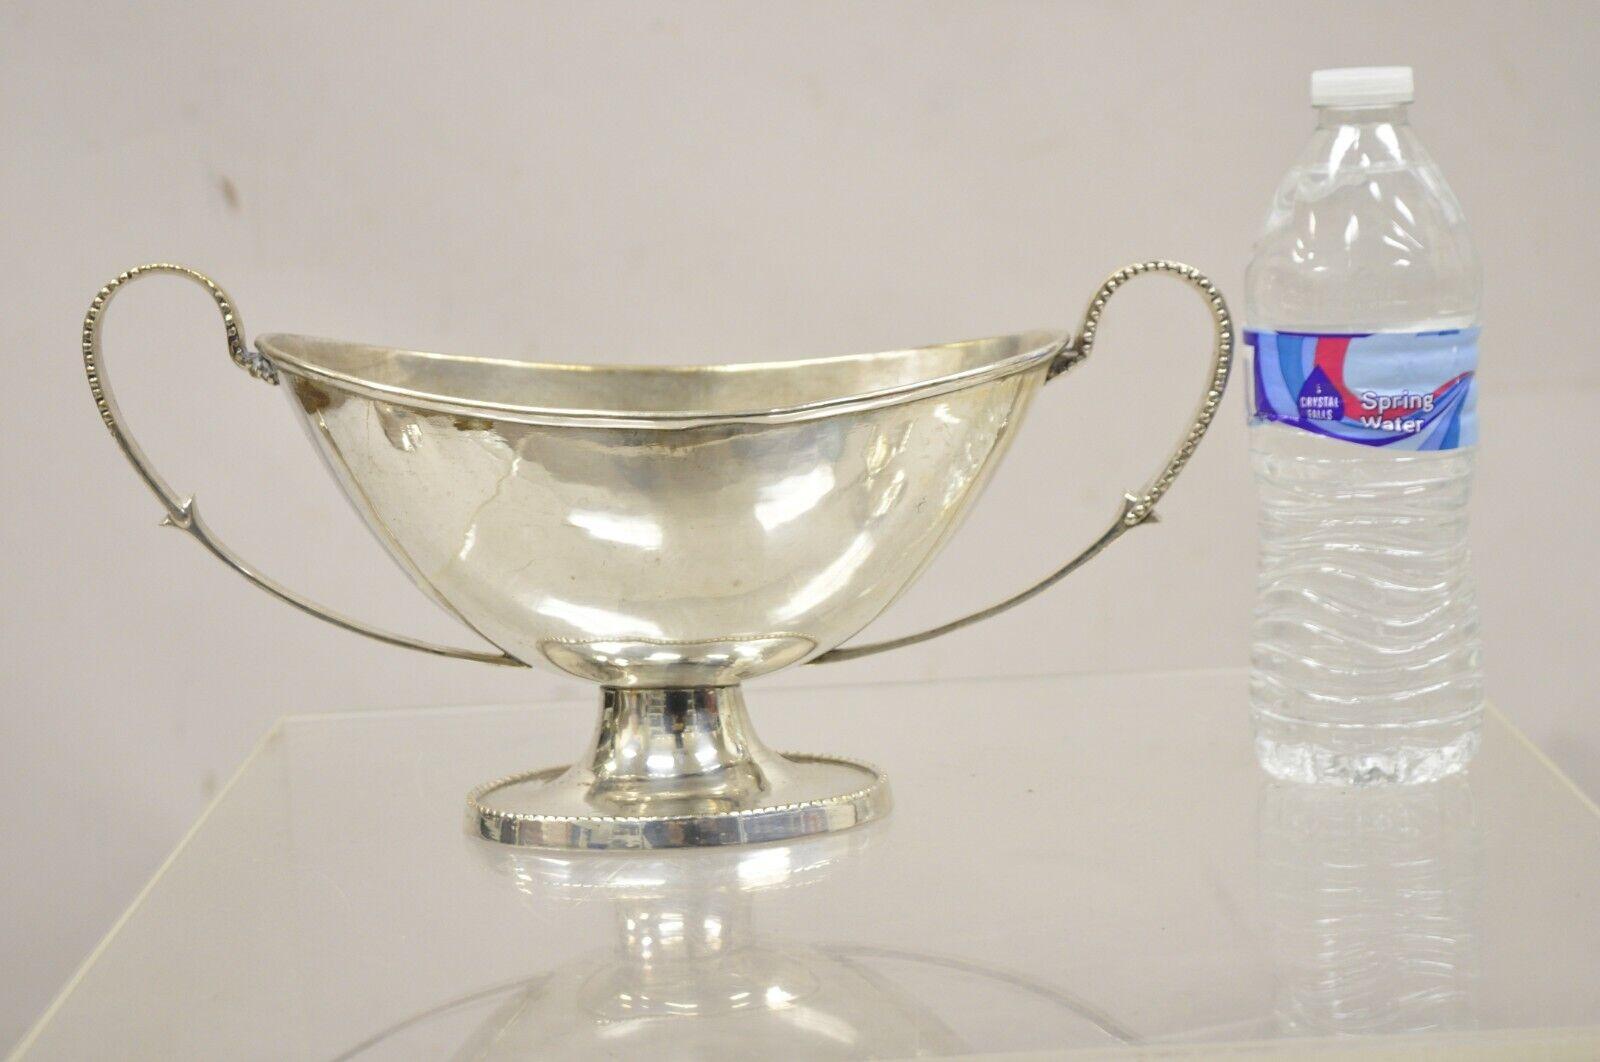 Antique English Victorian Silver Plated Urn Twin Handle Cup Small Fruit Bowl Candy Dish. Circa Early 20th Century. Measurements: 6.5